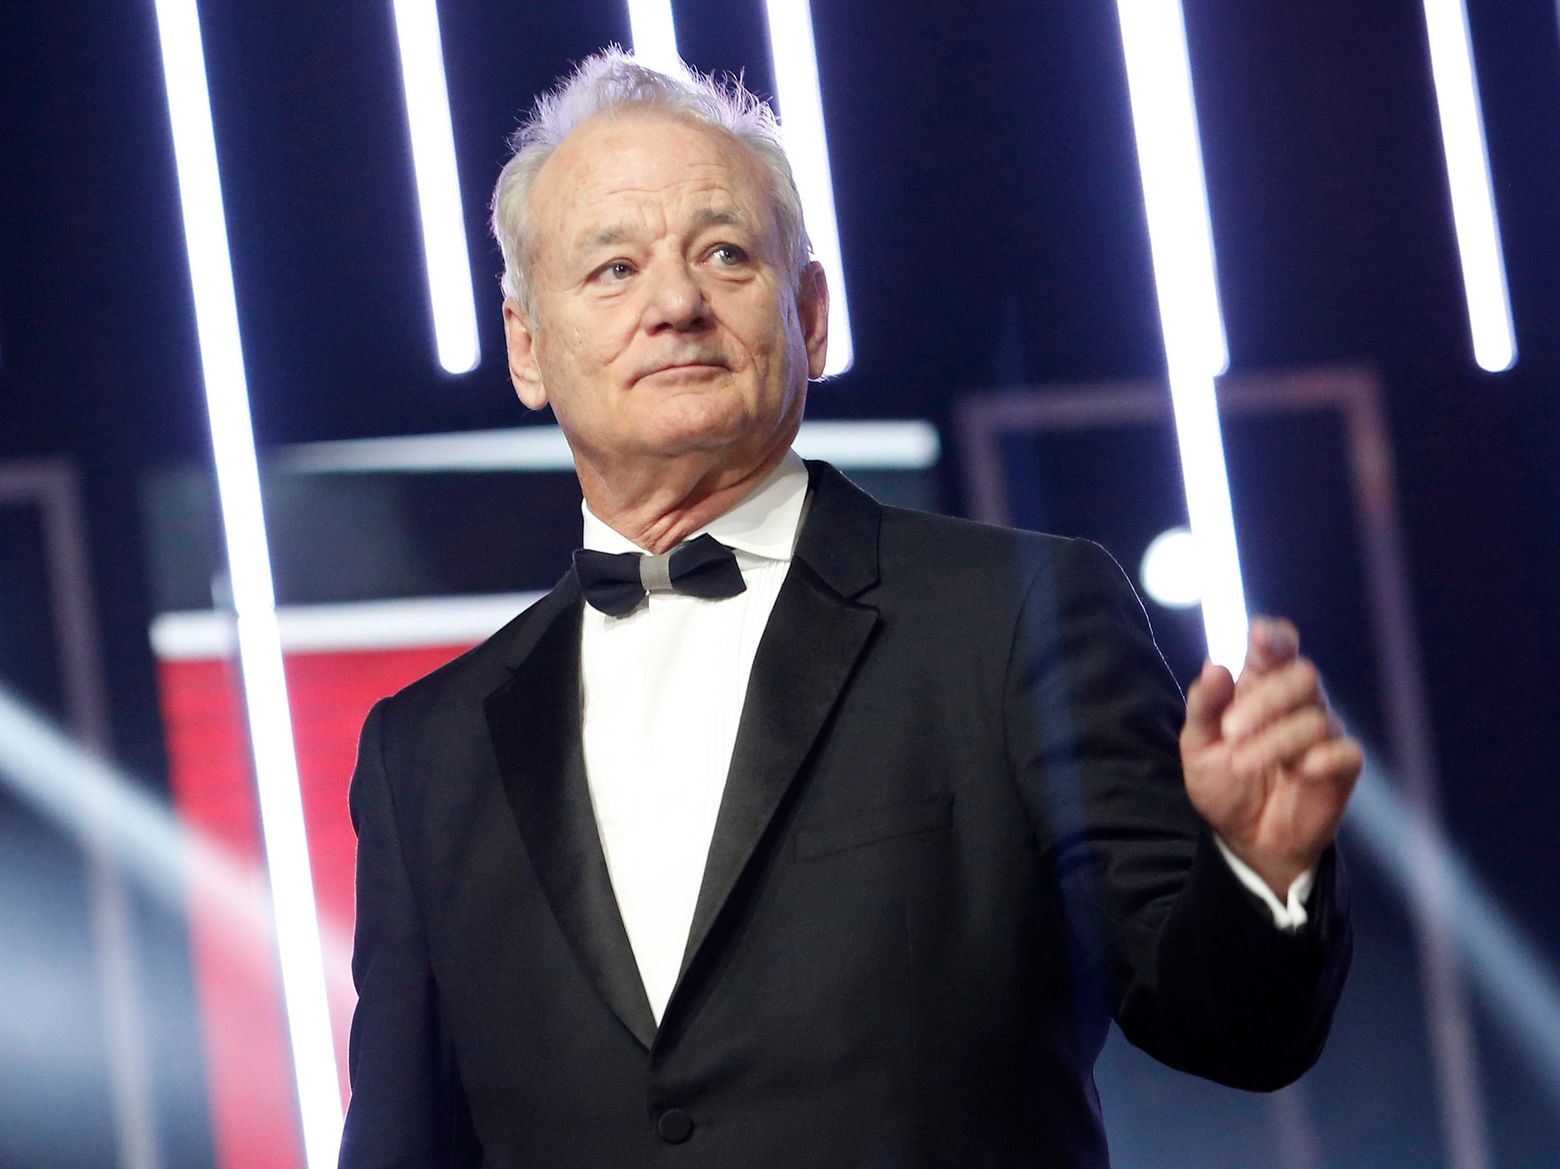 Emma Stone, Jane Curtin join Bill Murray tribute in DC - The Seattle Times